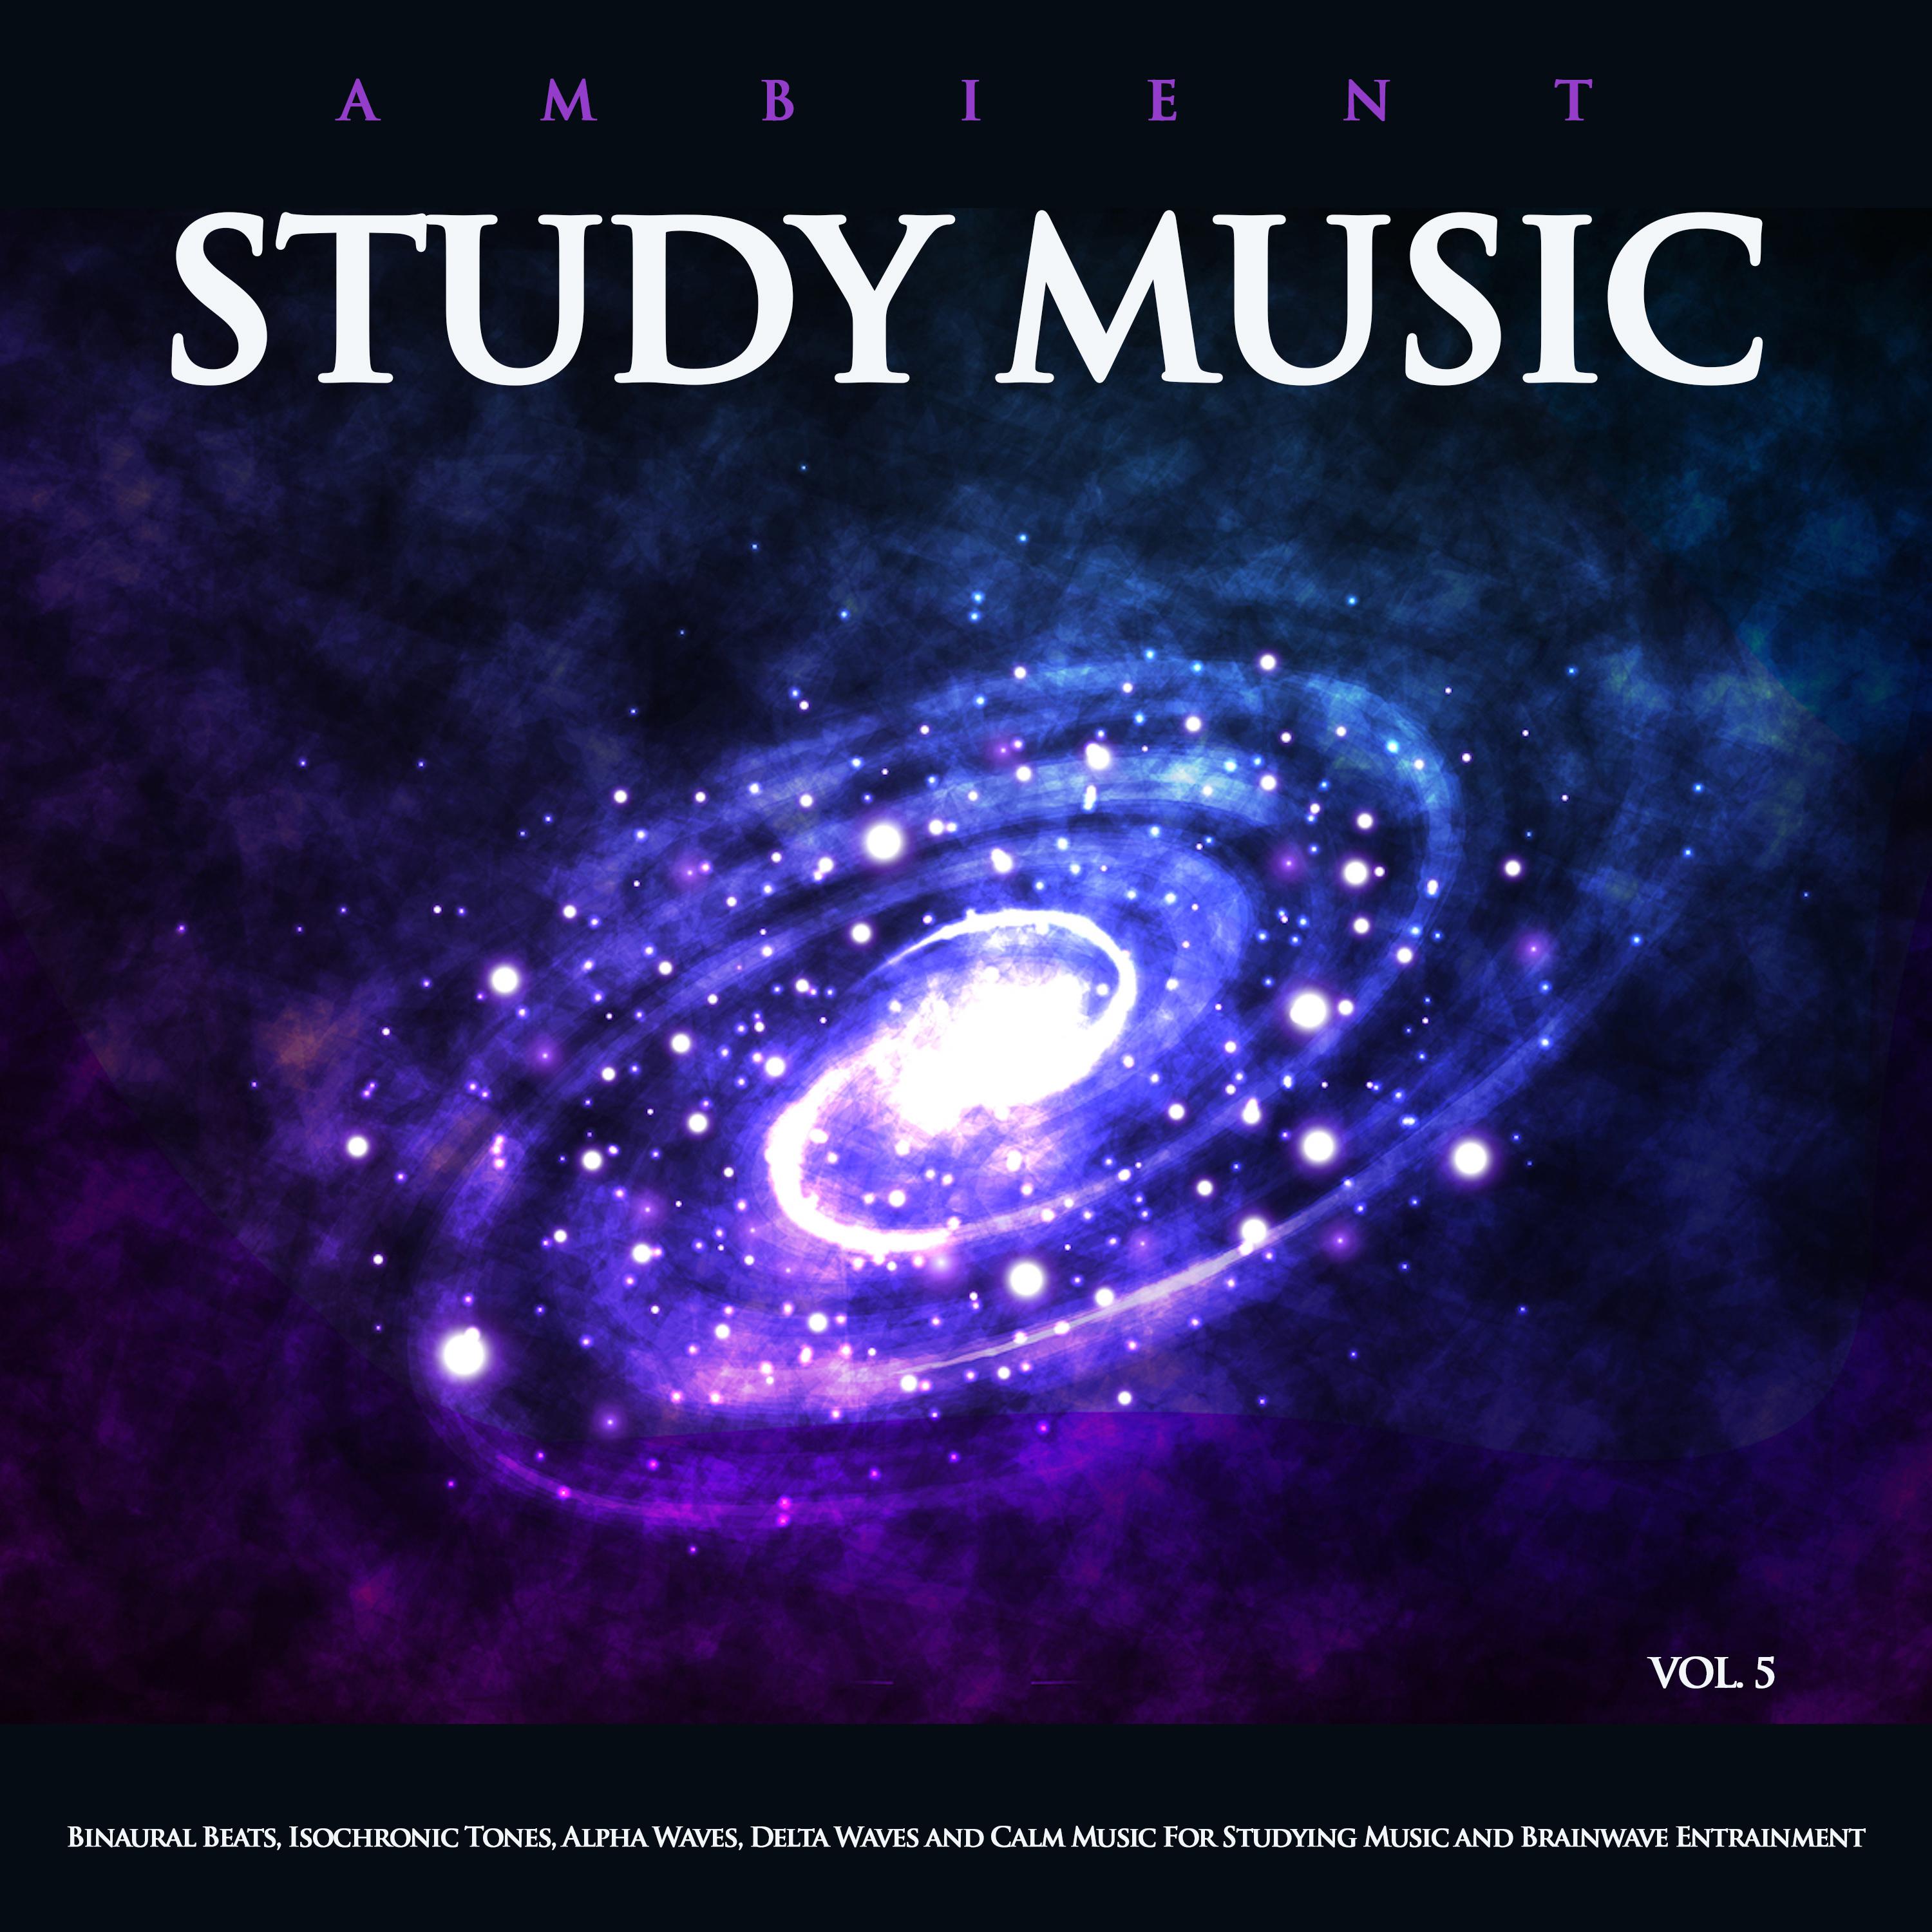 Delta Waves and Calm Music for Studying